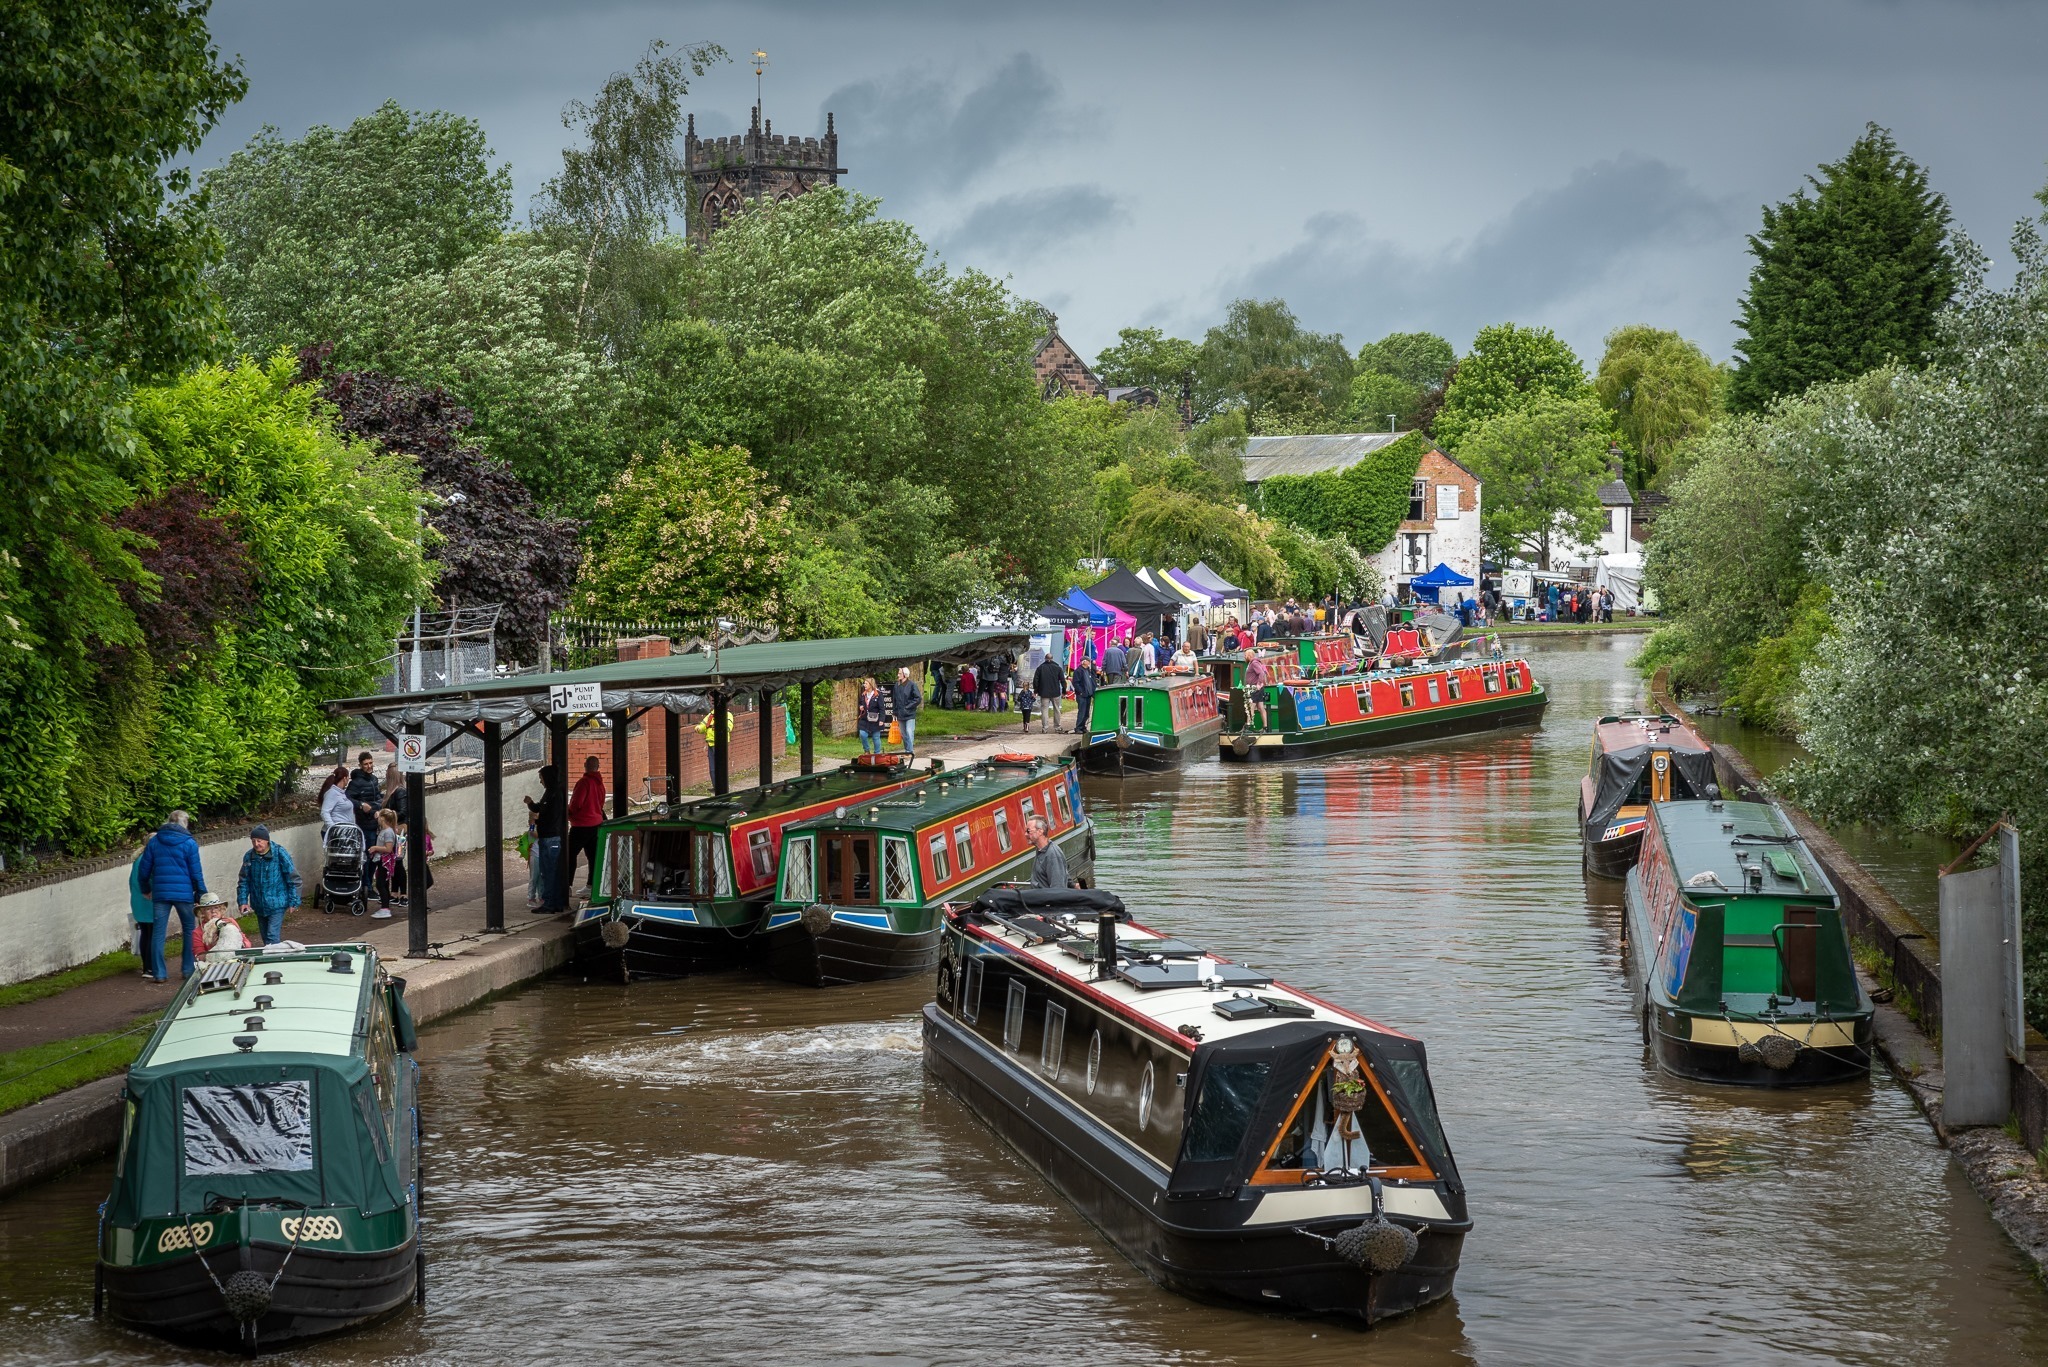 Colourful narrowboats in Middlewich (Richard Breland)